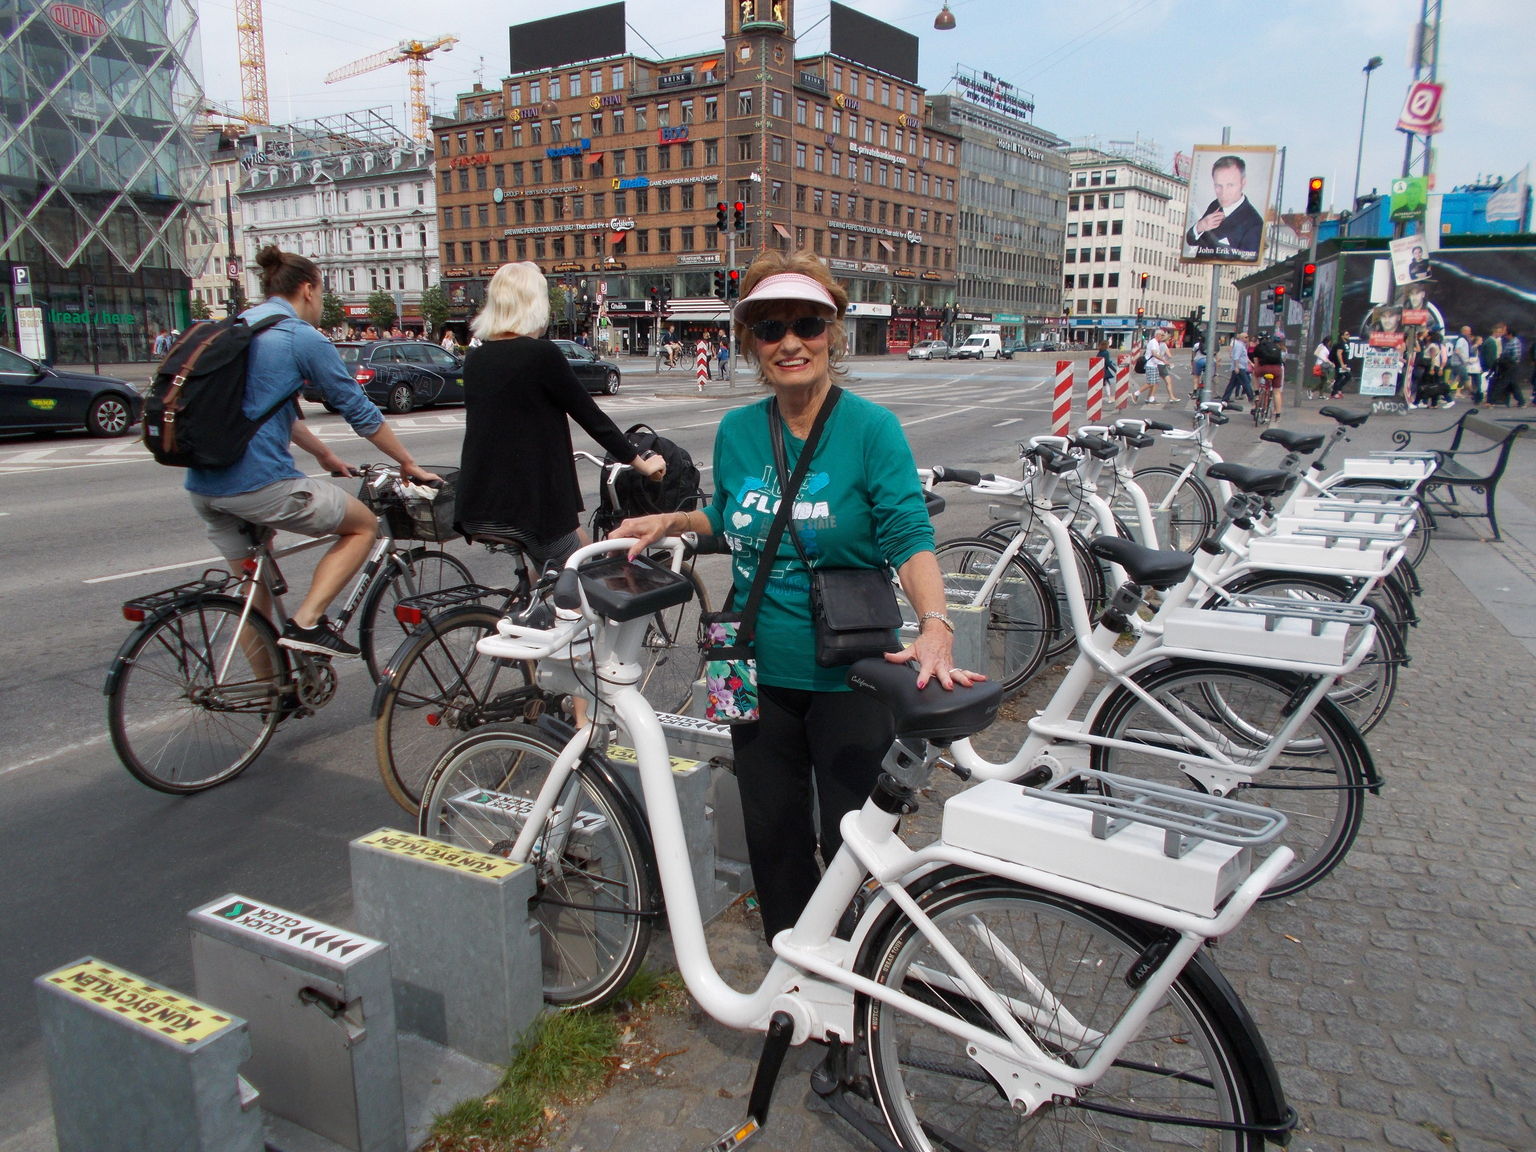 Bike-friendly Copenhagen is a perfect way to see Europe at its best!